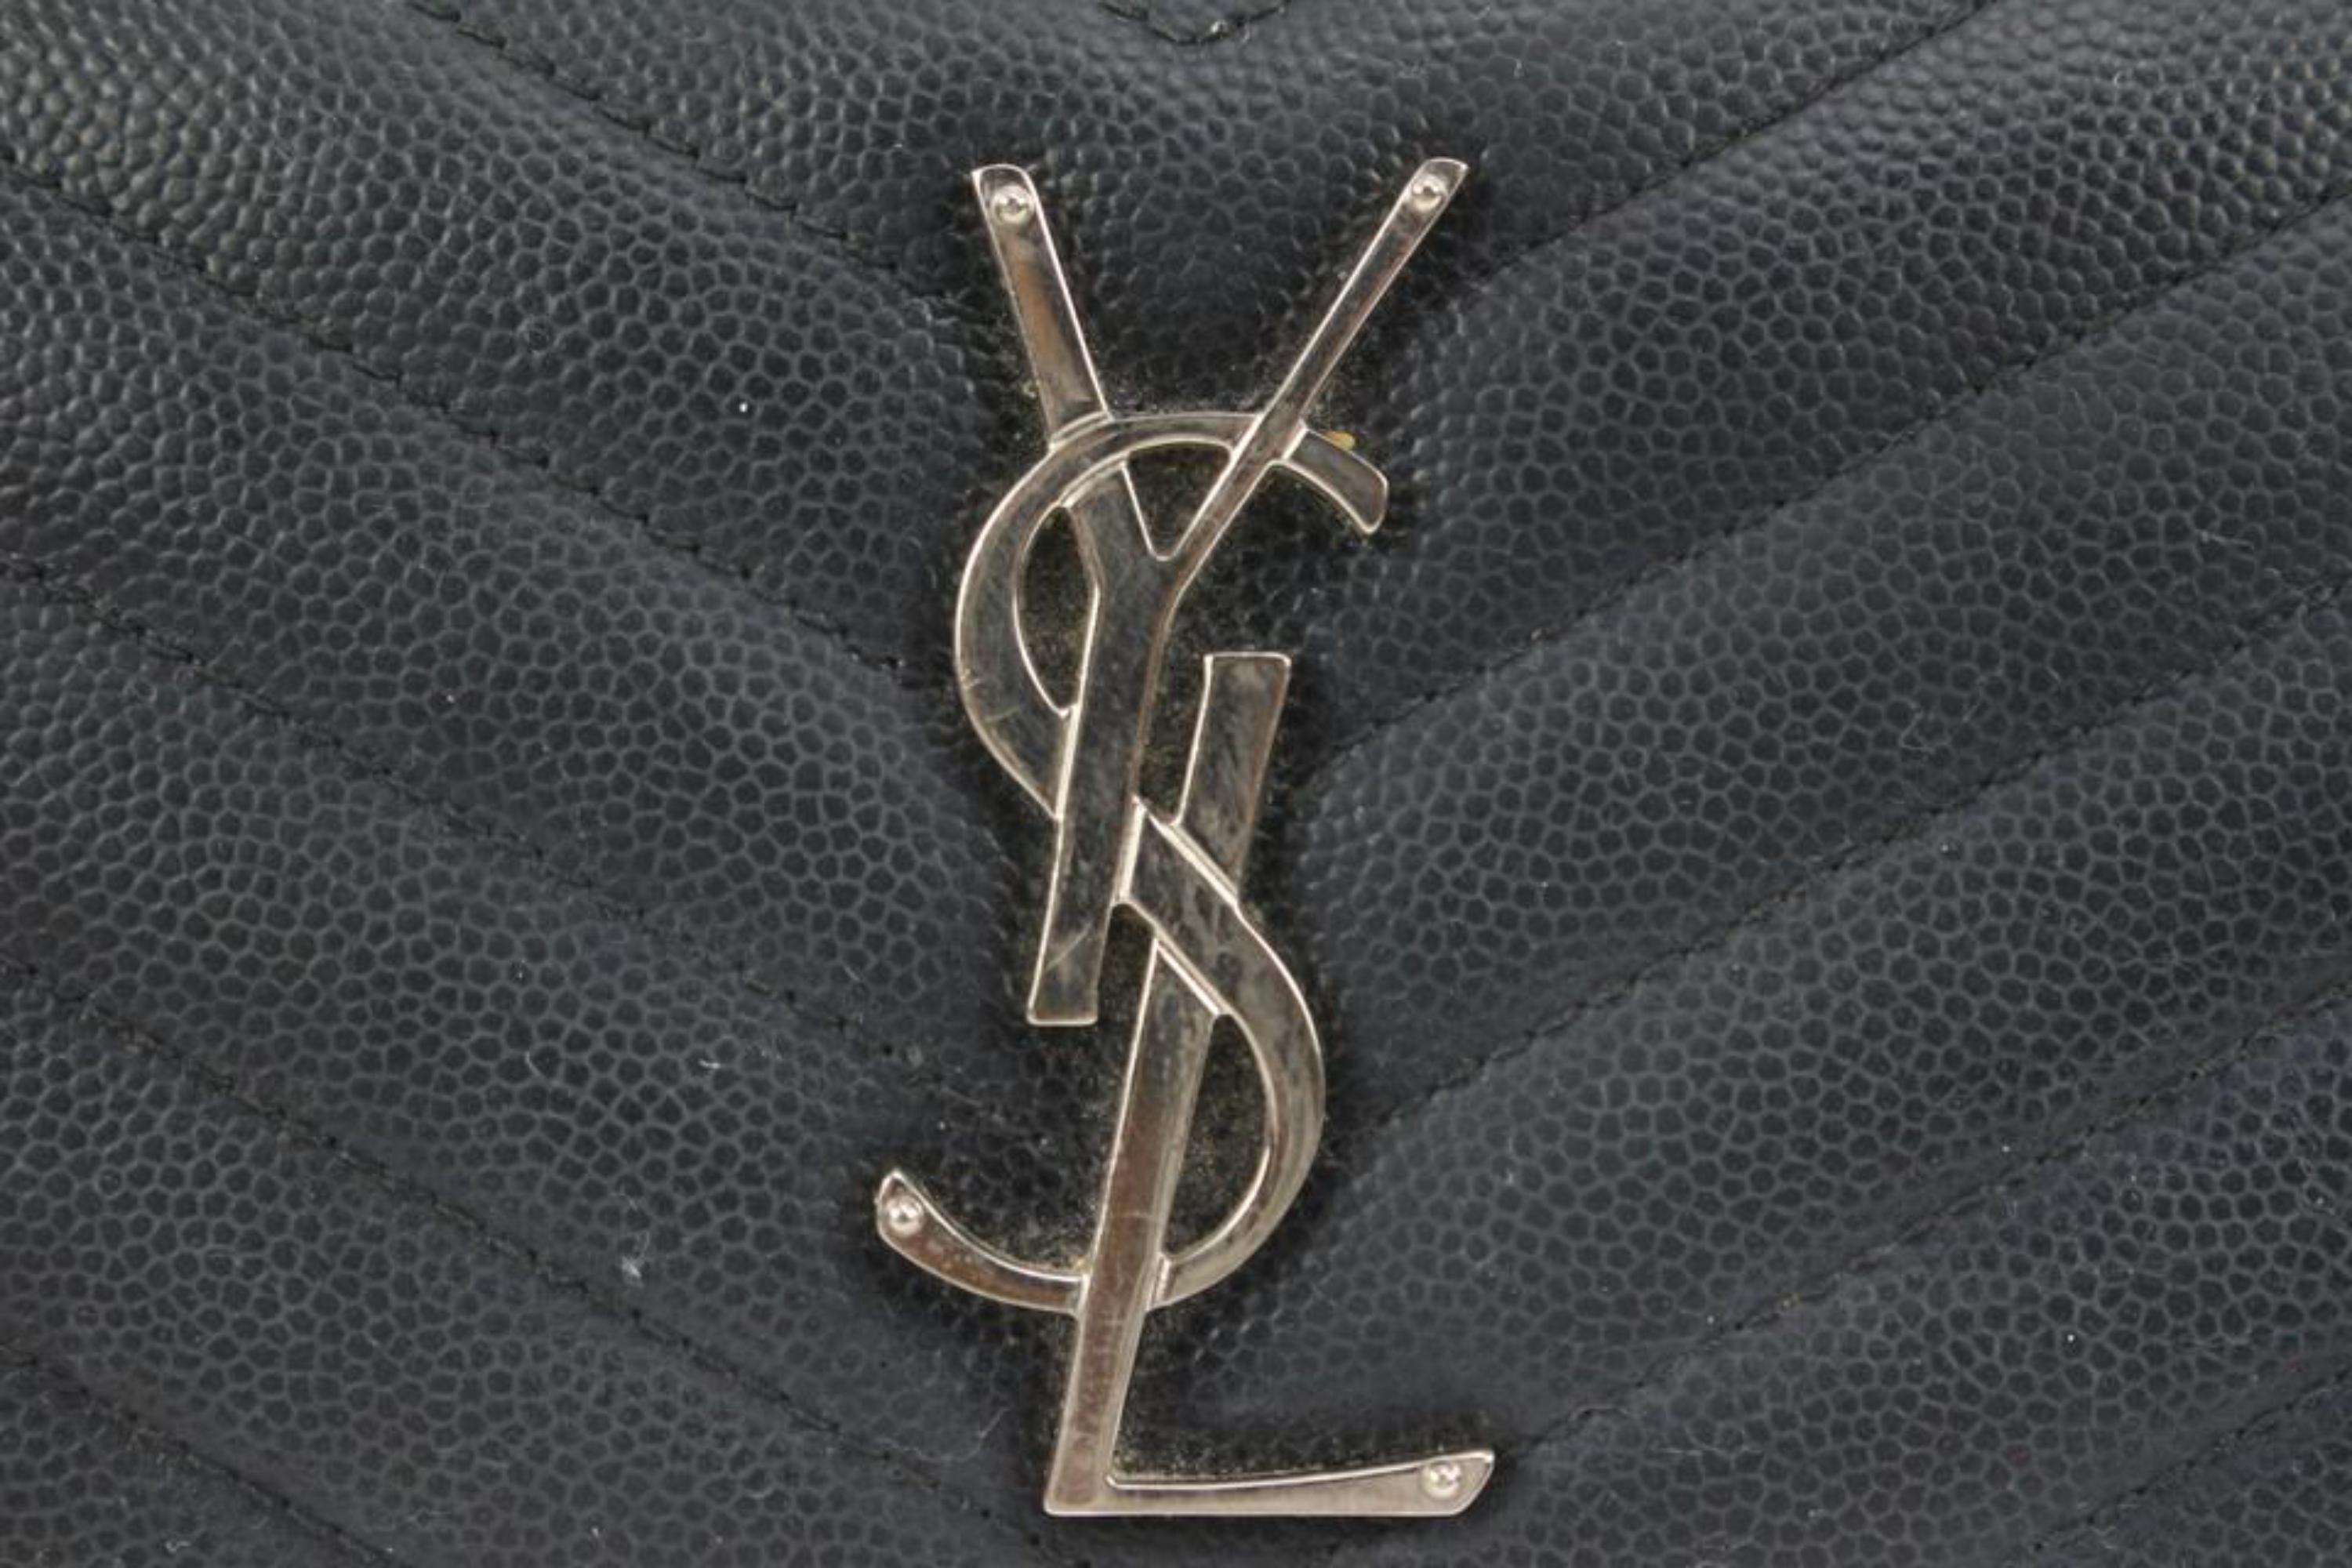 Saint Laurent Black Quilted Monogram Matelasse Leather Zip-Around Wallet 49YS37S In Fair Condition For Sale In Dix hills, NY